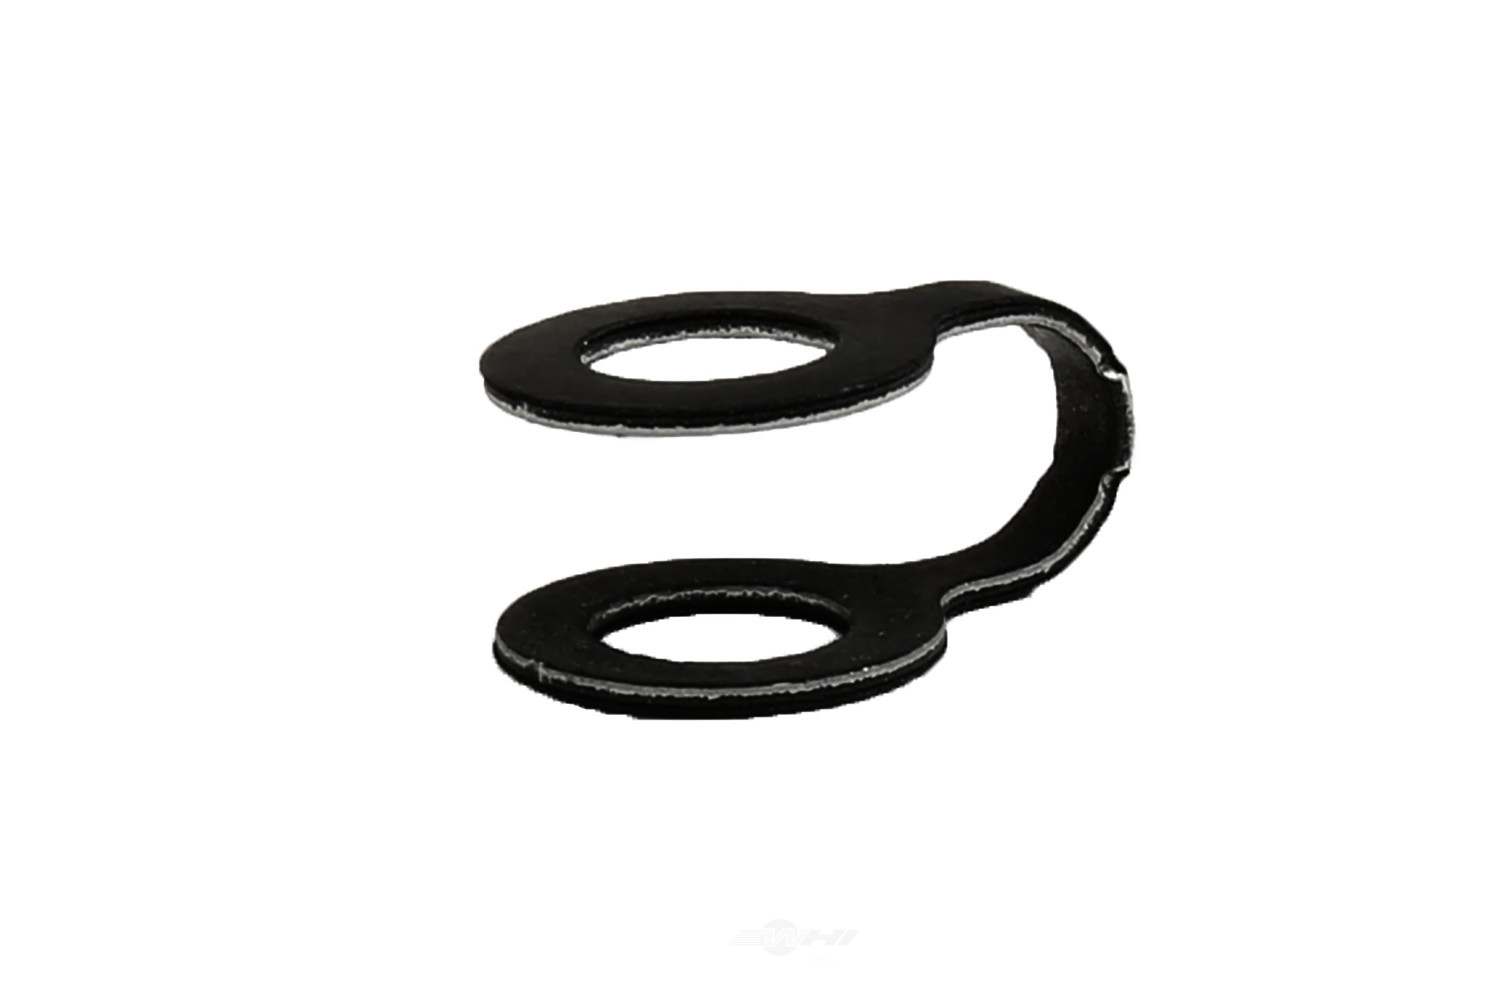 GM GENUINE PARTS - Fuel Feed Pipe O-Ring - GMP 12630832